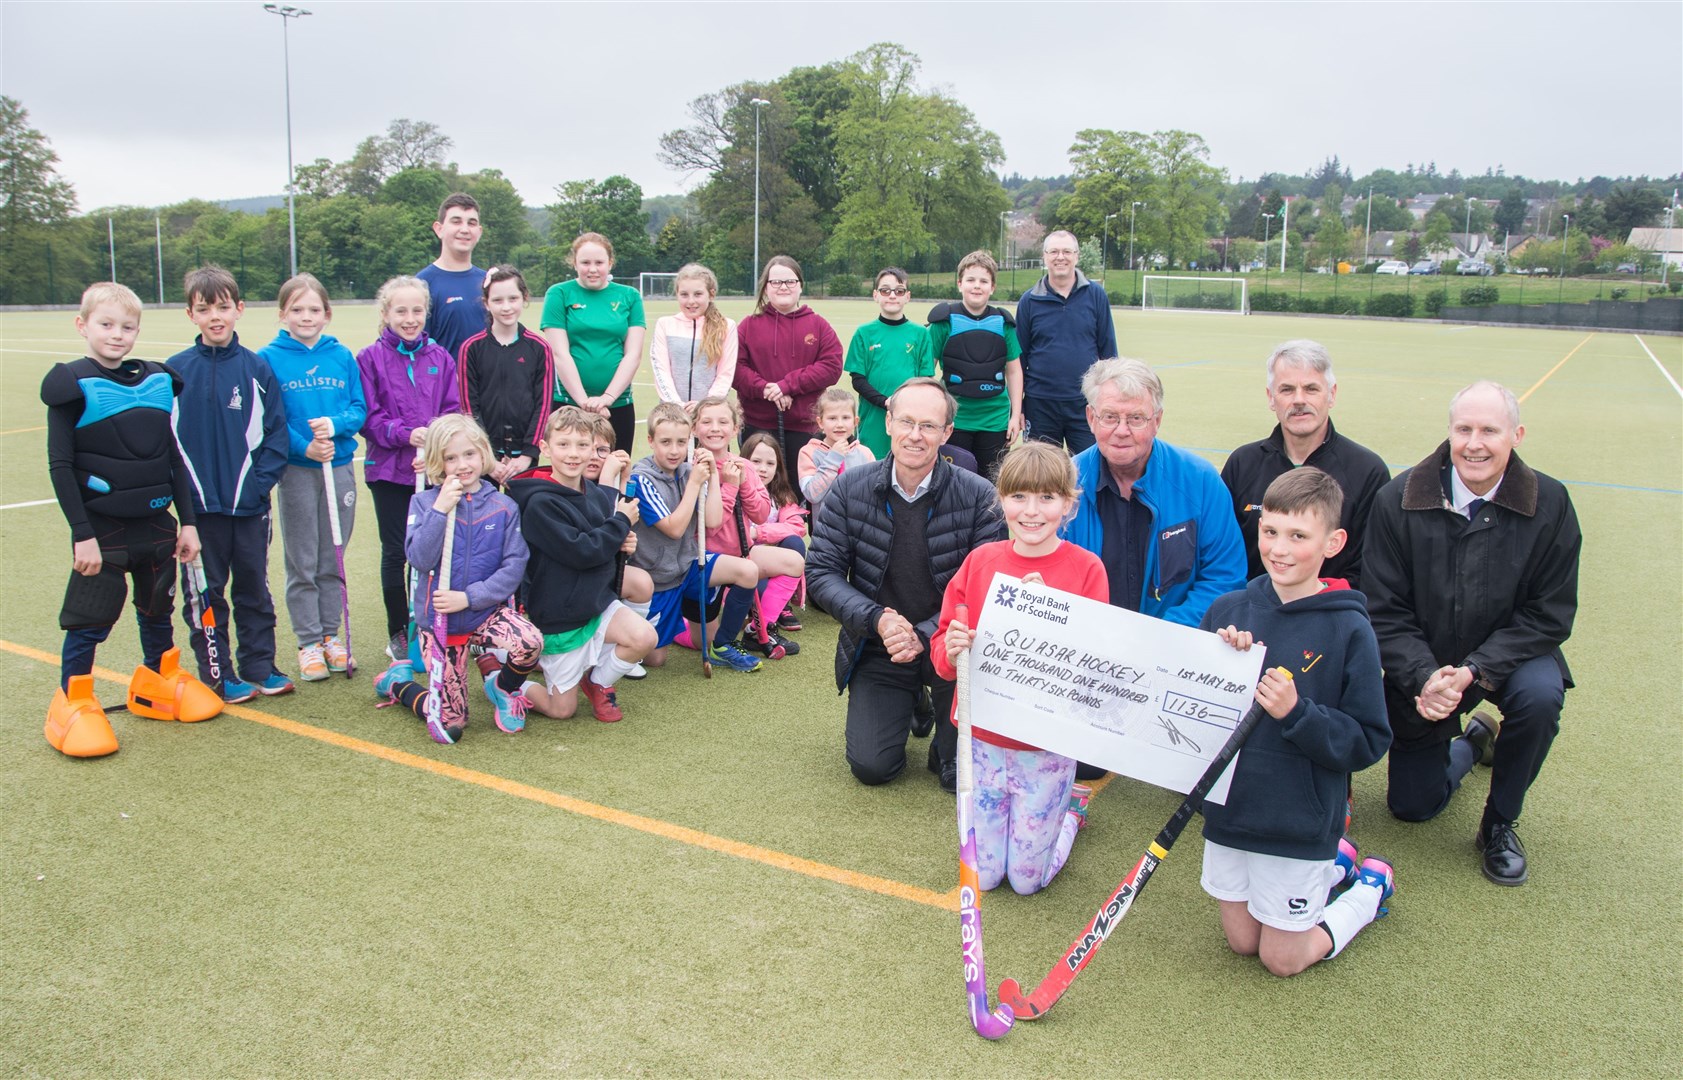 Quasar players (front) Zoe Beange and Fergus Smith, with coach Pete Bavidge (middle second right), receive a cheque from Moray Hockey Club members (middle from left) Jamie Watson, Bill Hope and Will Cowie during a training session at the Elgin Academy pitches. Picture: Becky Saunderson. Image No.043869.